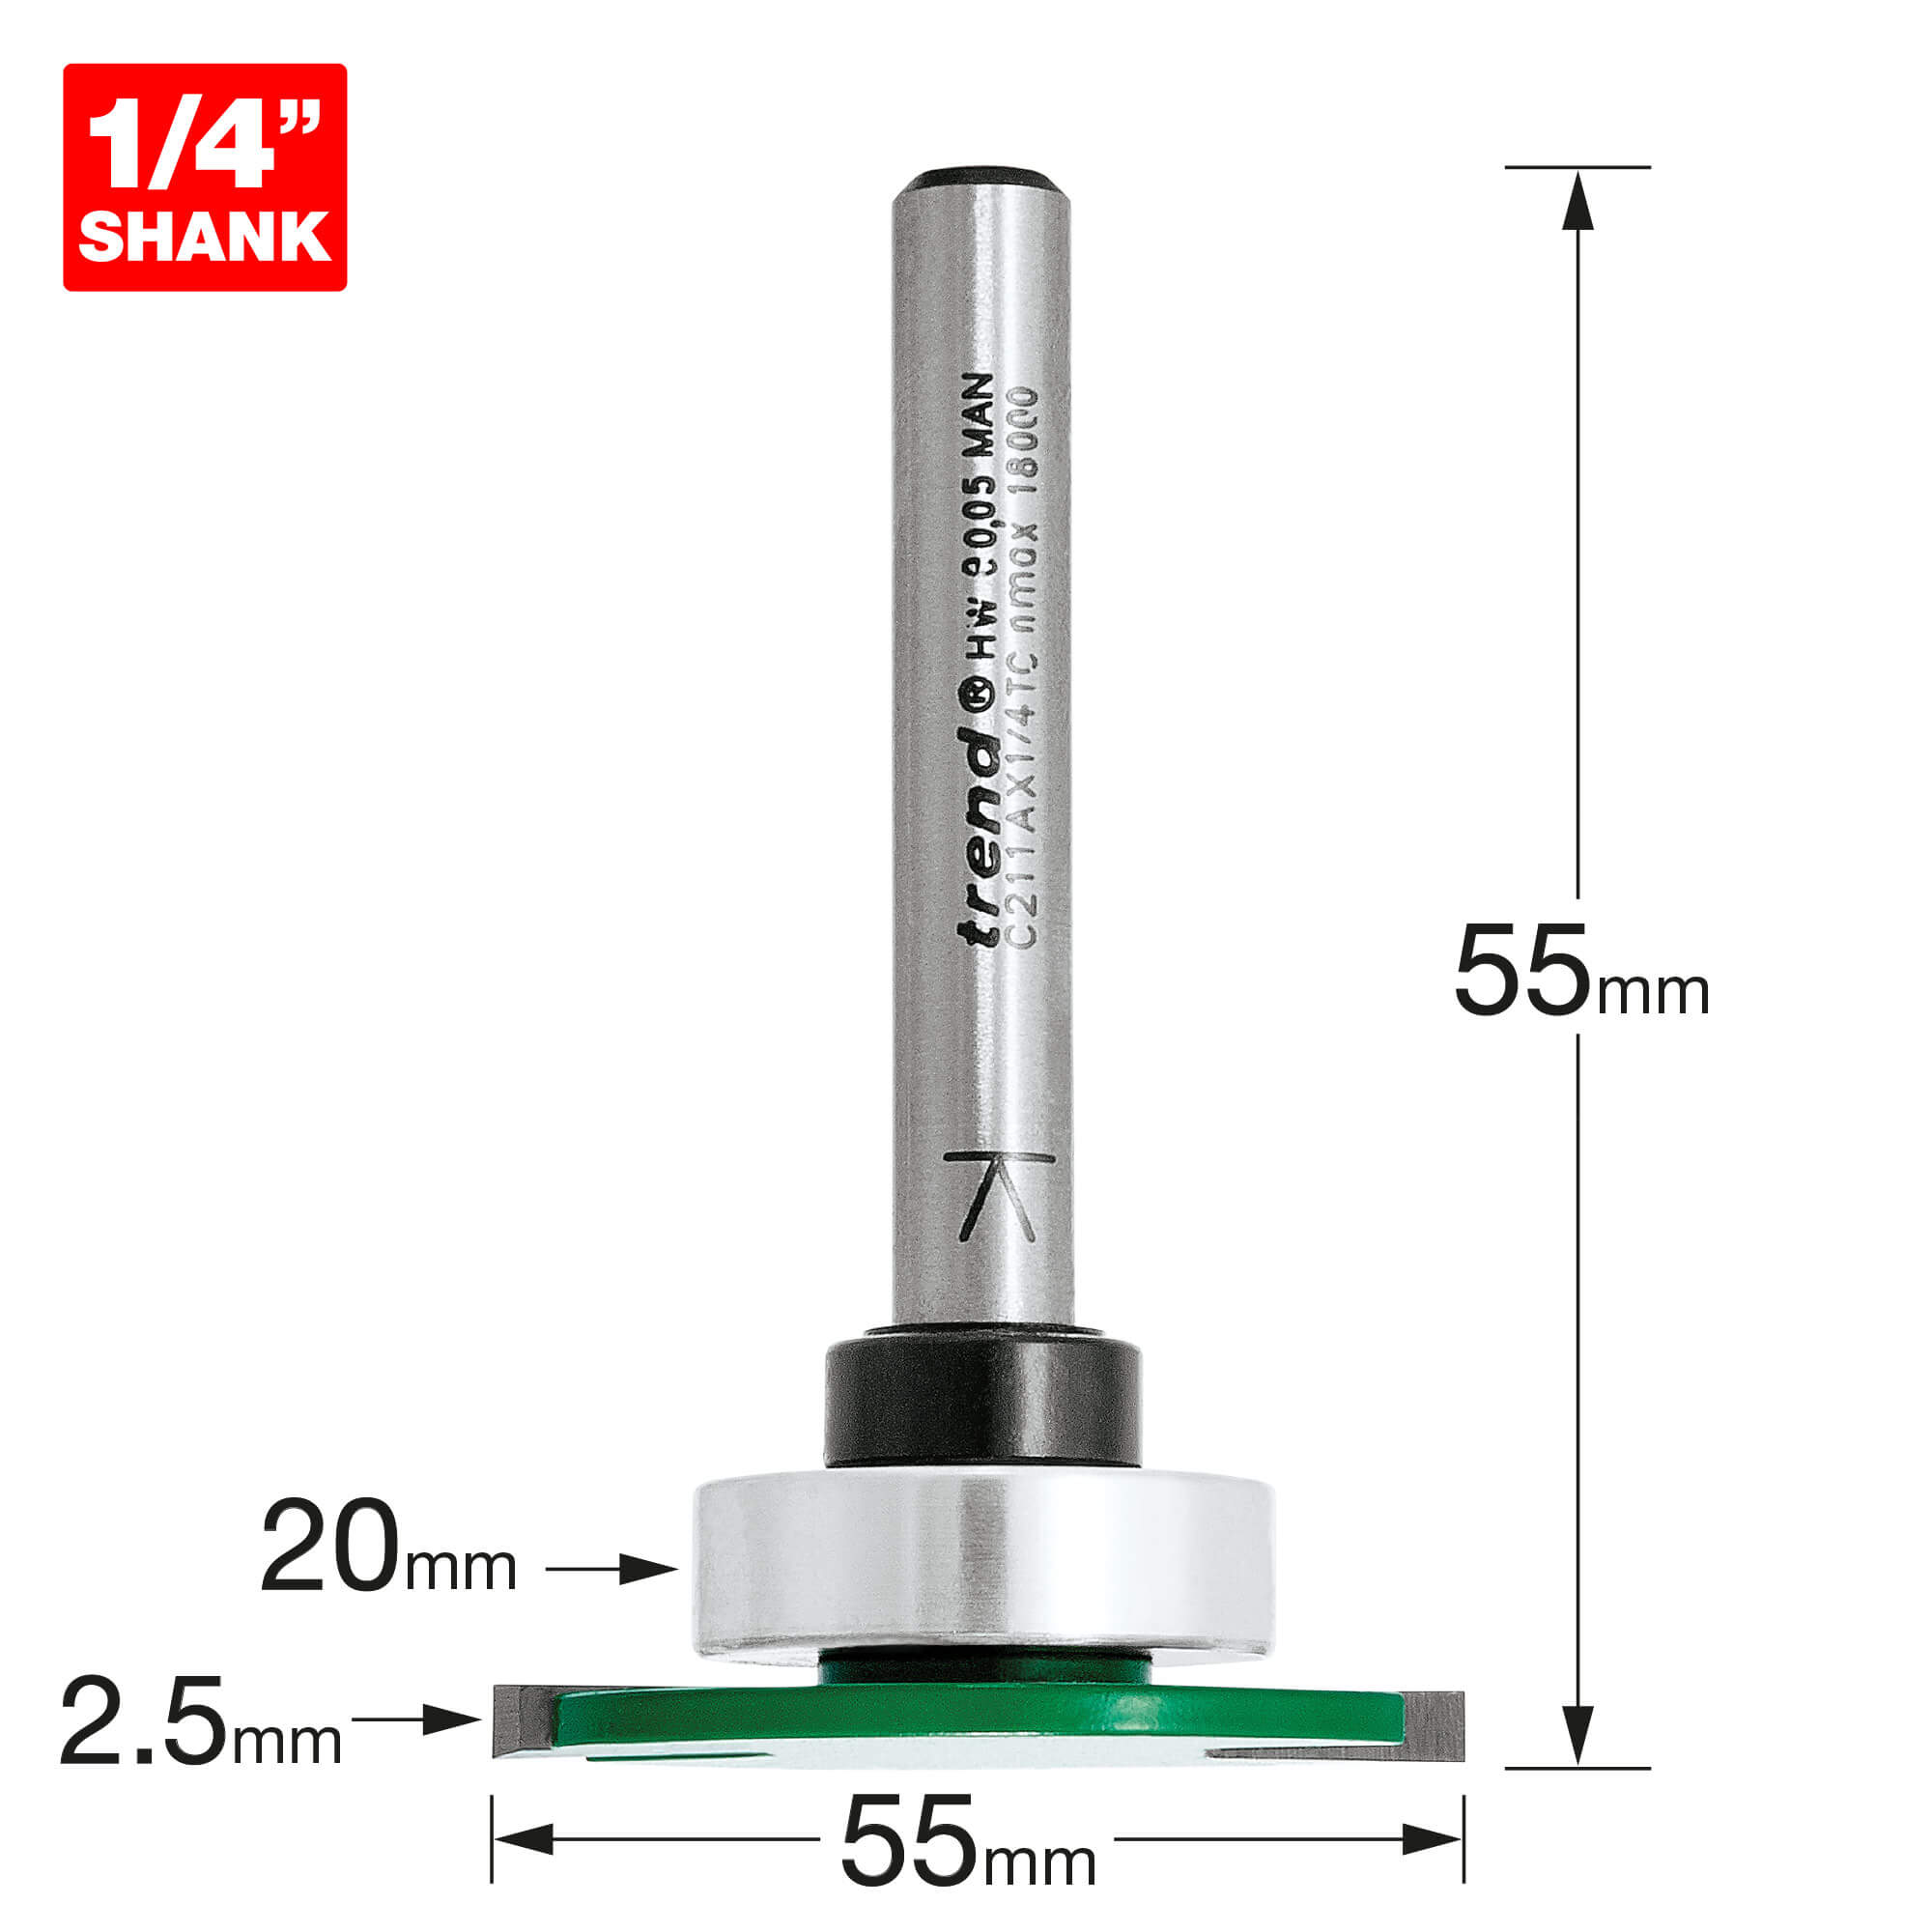 Image of Trend CRAFTPRO Weatherseal Groover Router Cutter 34mm 2.5mm 1/4"